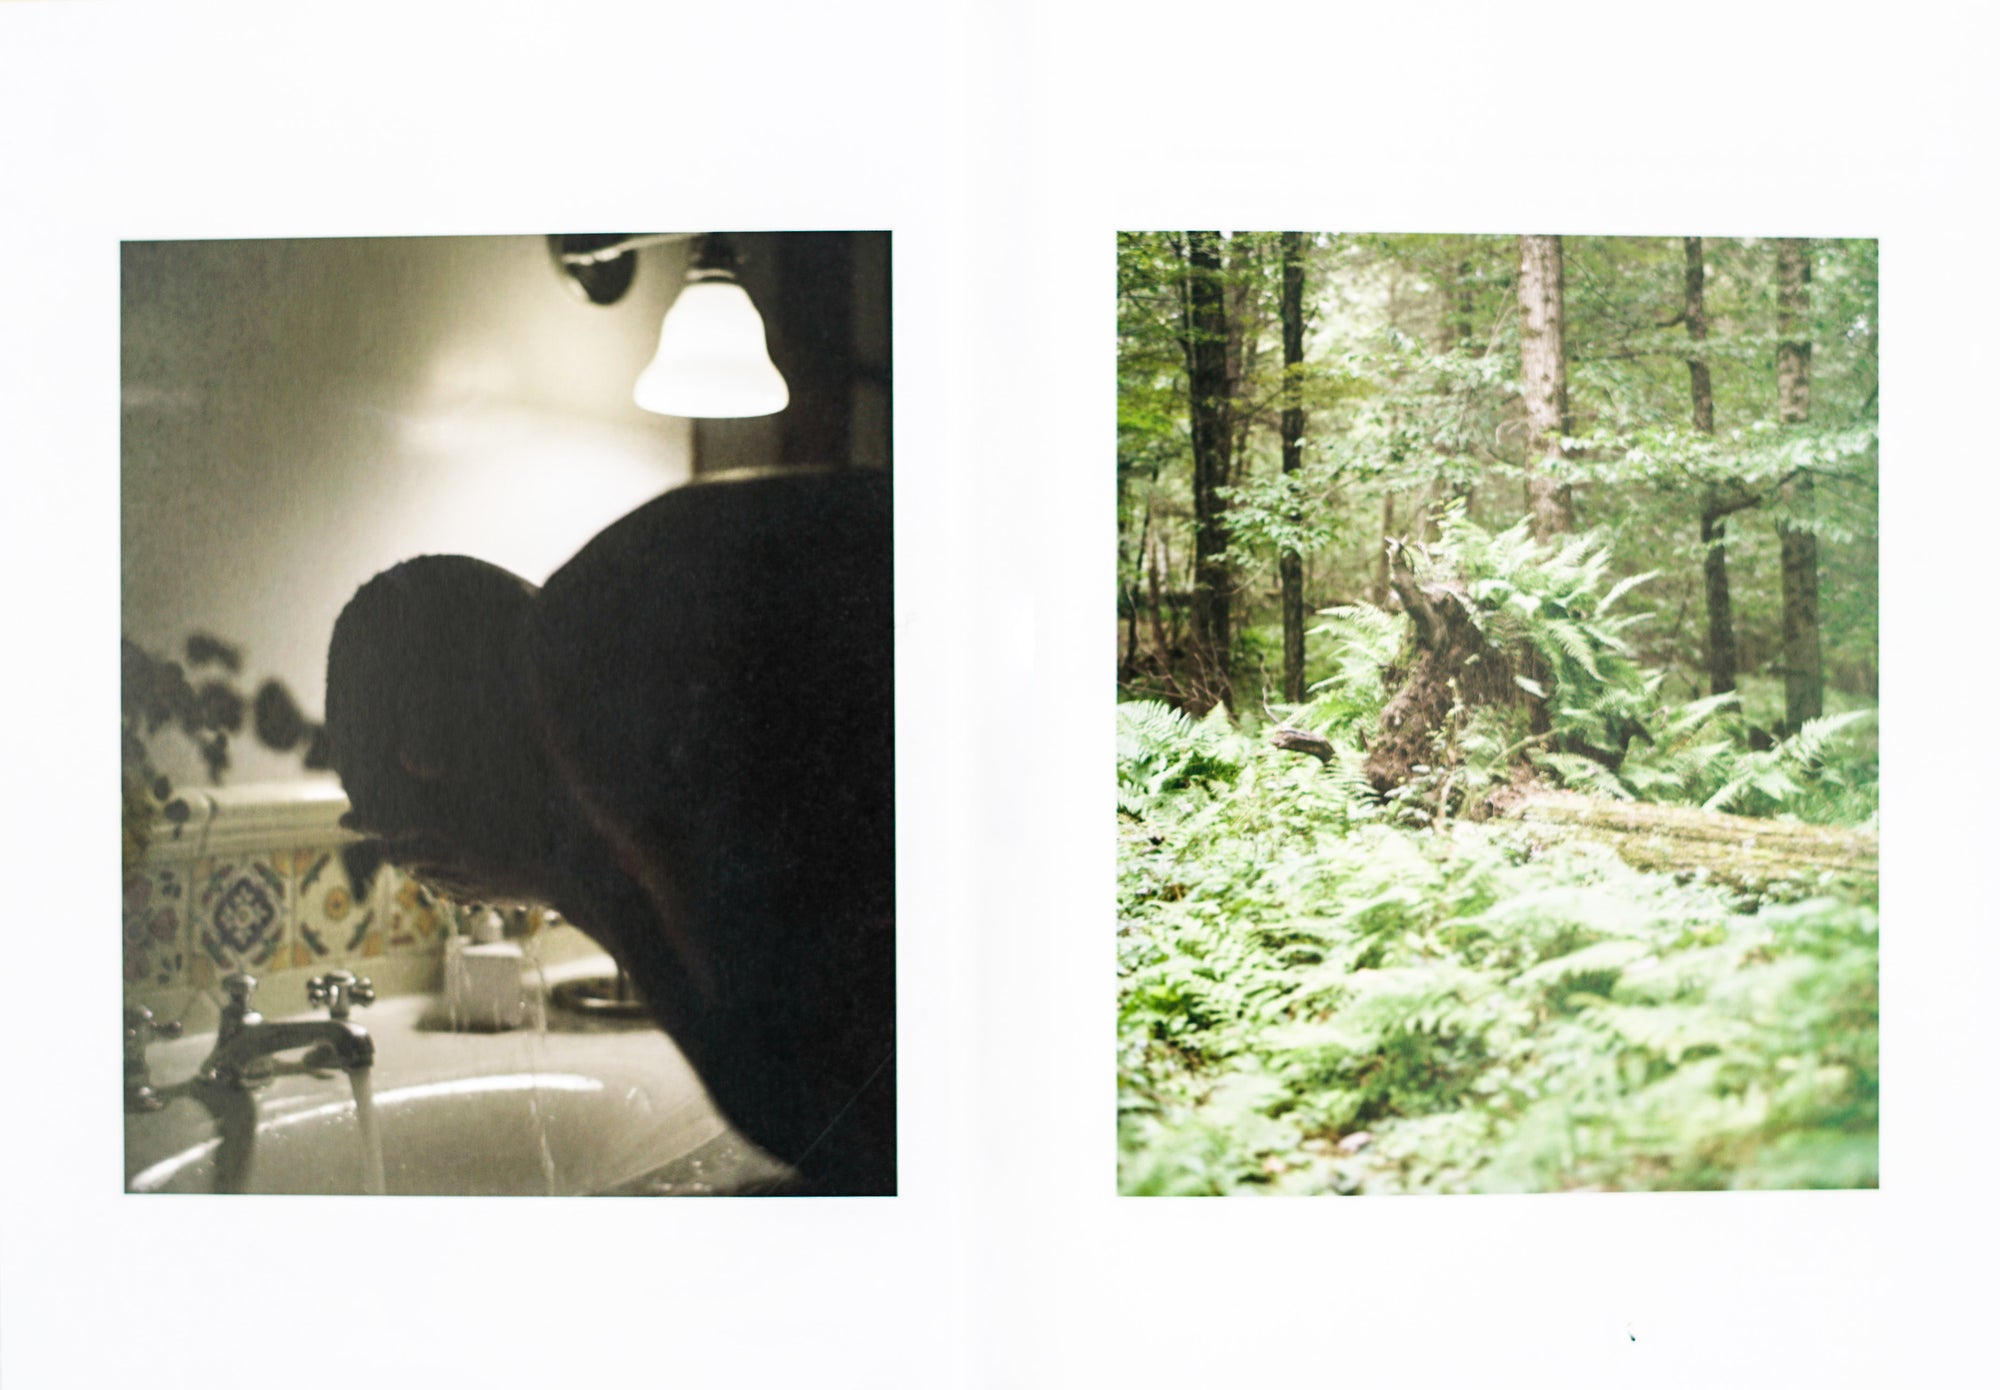 Book spread with white background and two colour photographies on each side. Left is a person bending over a sink washing their face in a bathroom. On the right page is a depiction of fern and trees in a forest.